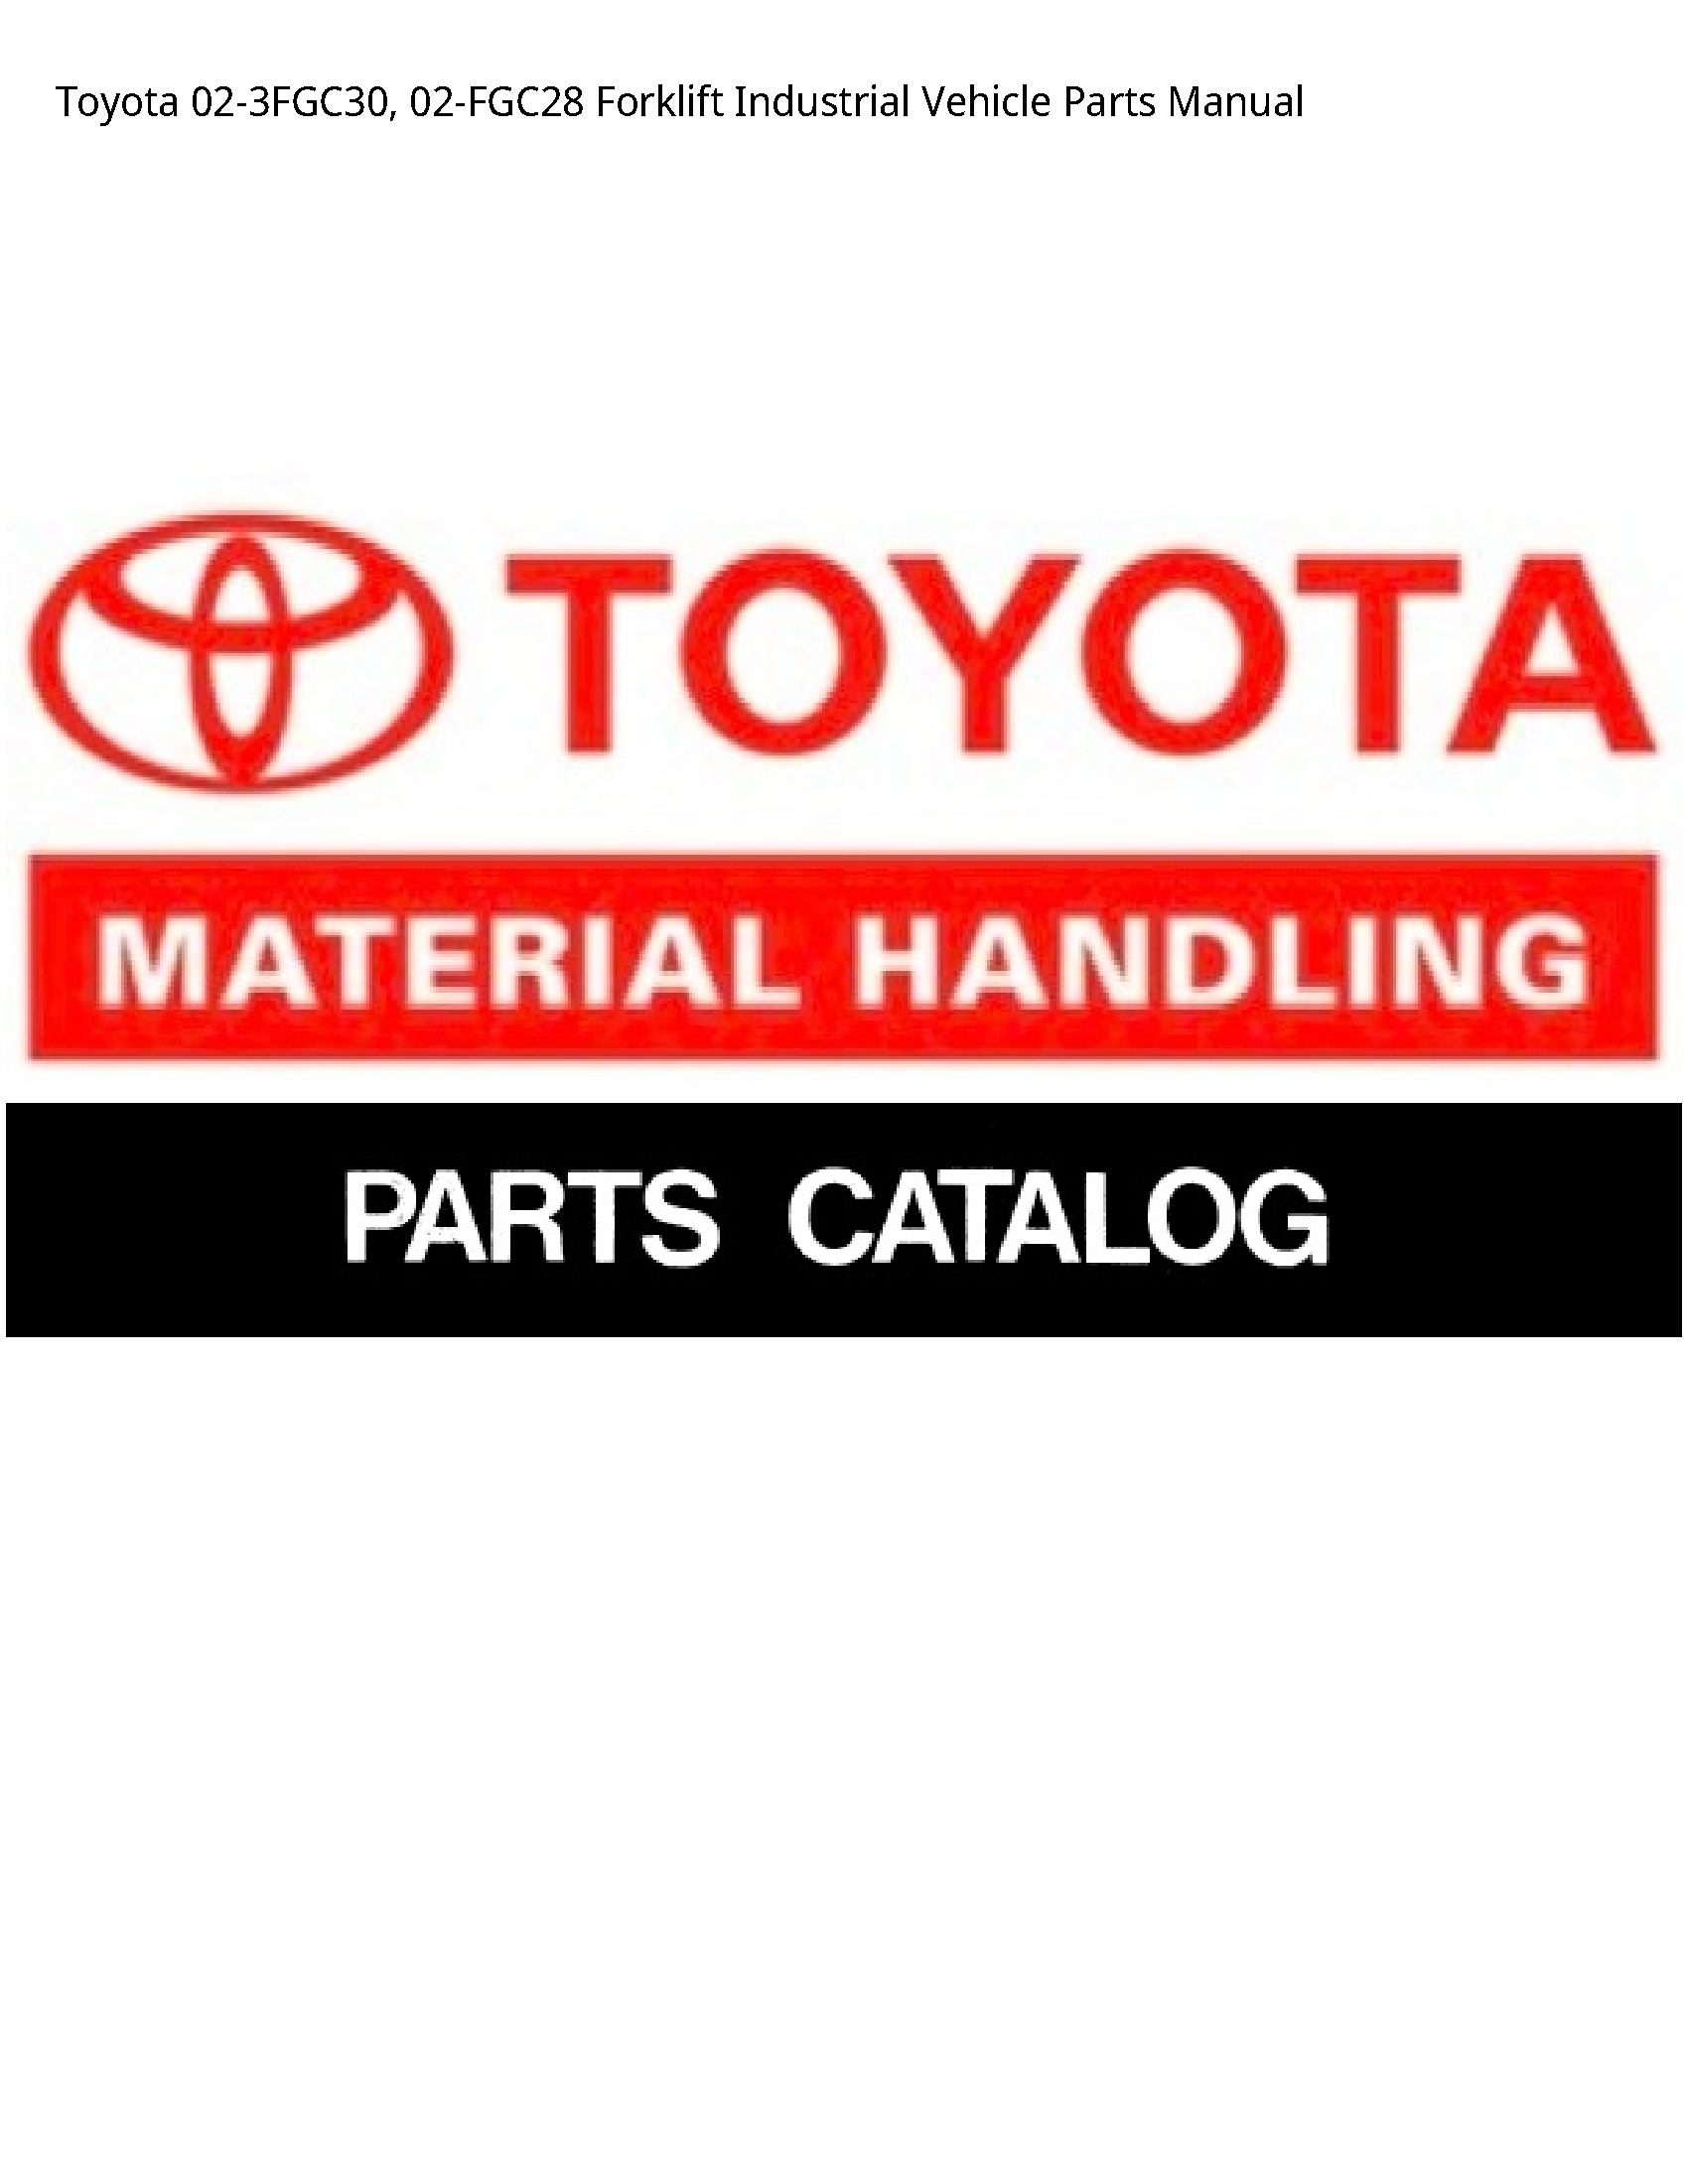 Toyota 02-3FGC30 Forklift Industrial Vehicle Parts manual